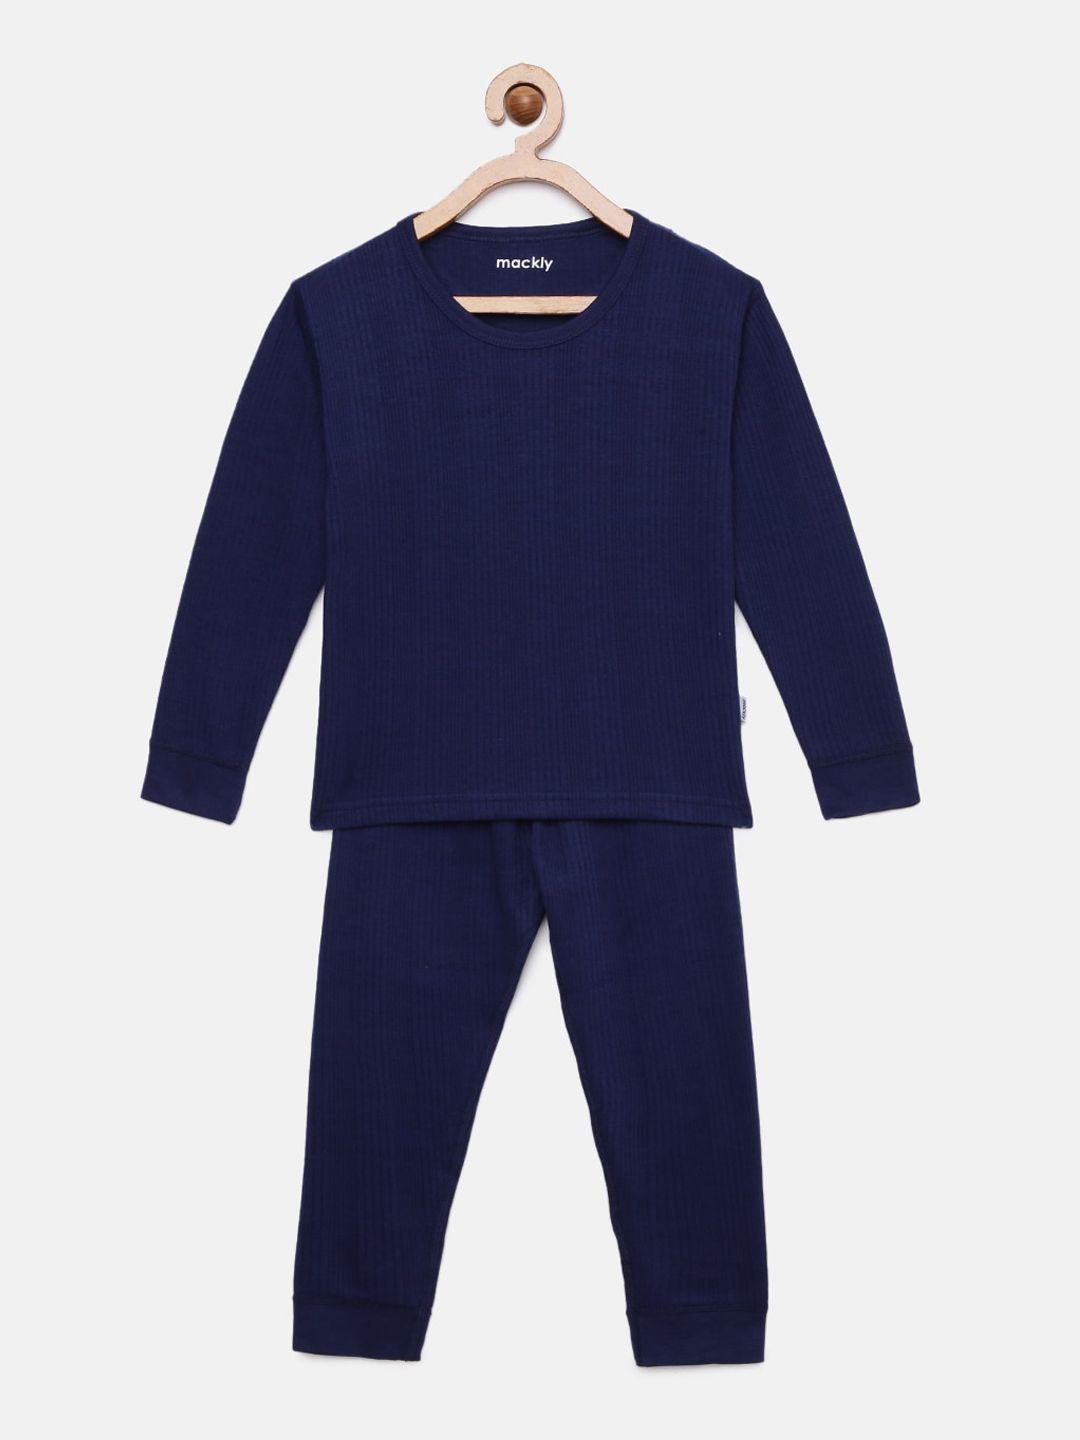 mackly kids navy blue solid thermal set